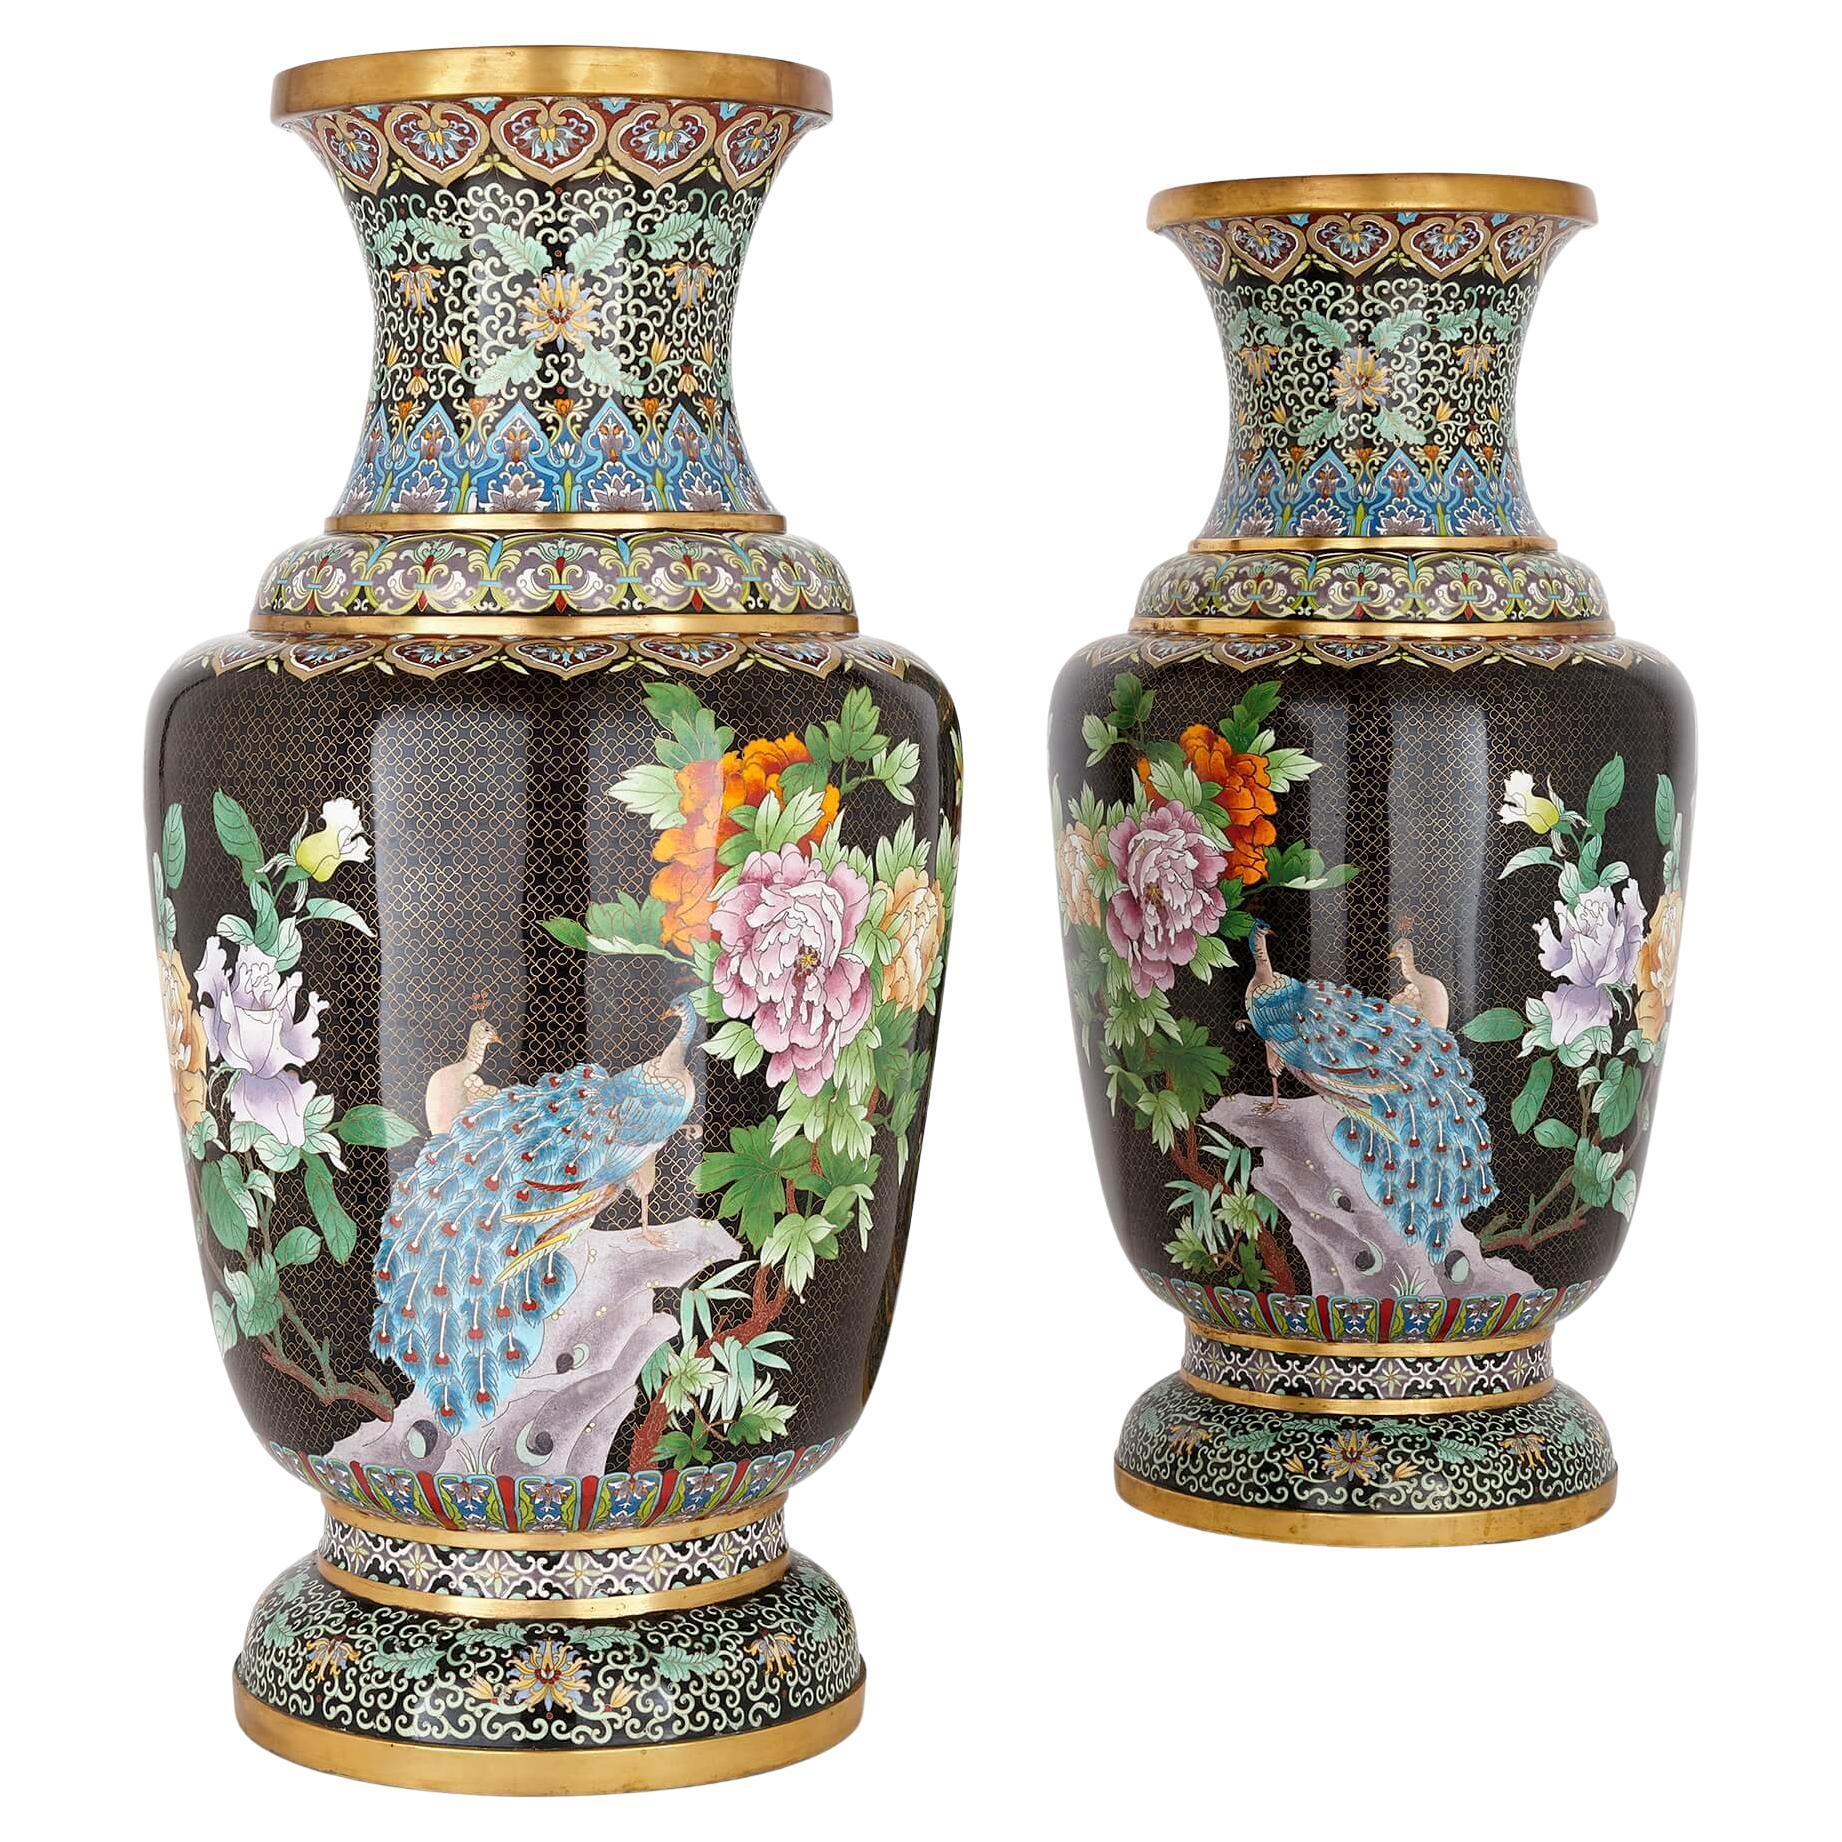 Pair of Large Chinese Gilt and Black Ground Cloisonné Enamel Vases